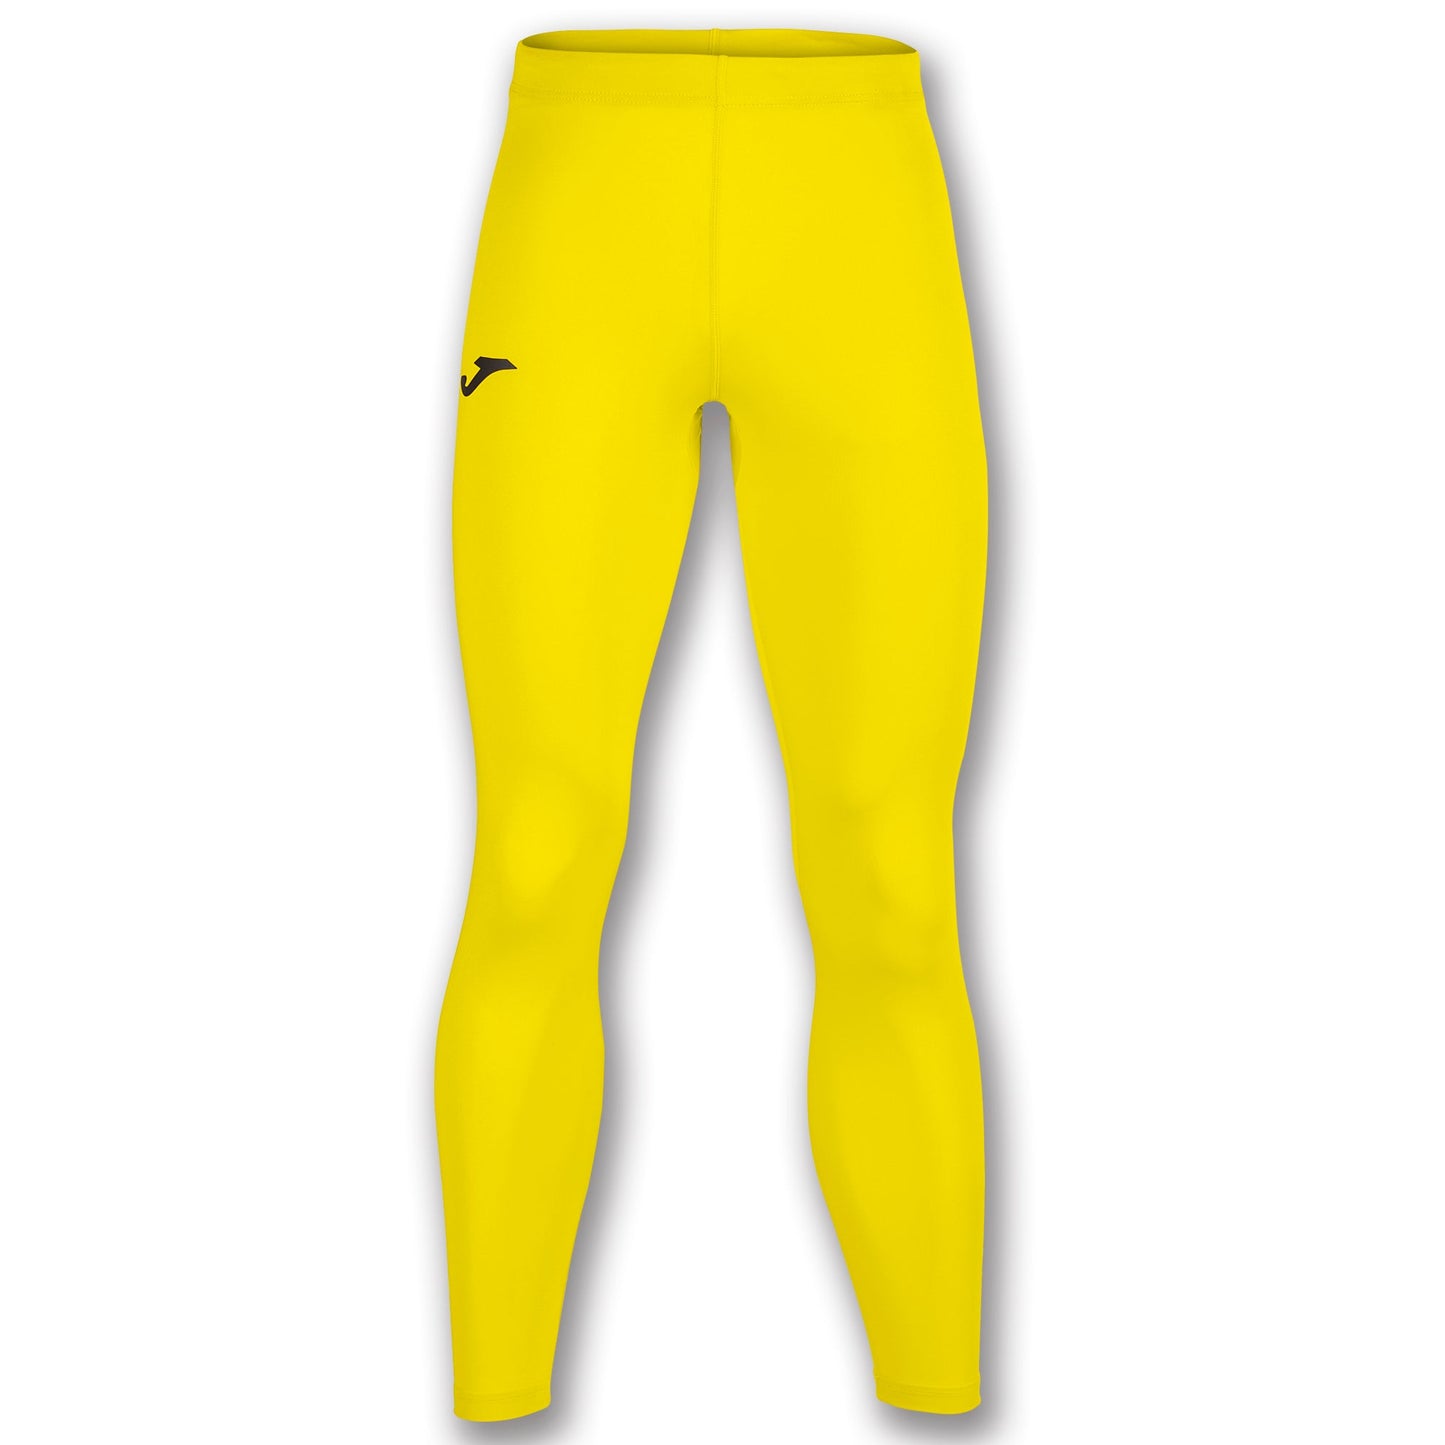 Joma Brama Baselayer Long Pant, available in Joma Canada Store. Joma is shipping in Canada. For club offers contact us.